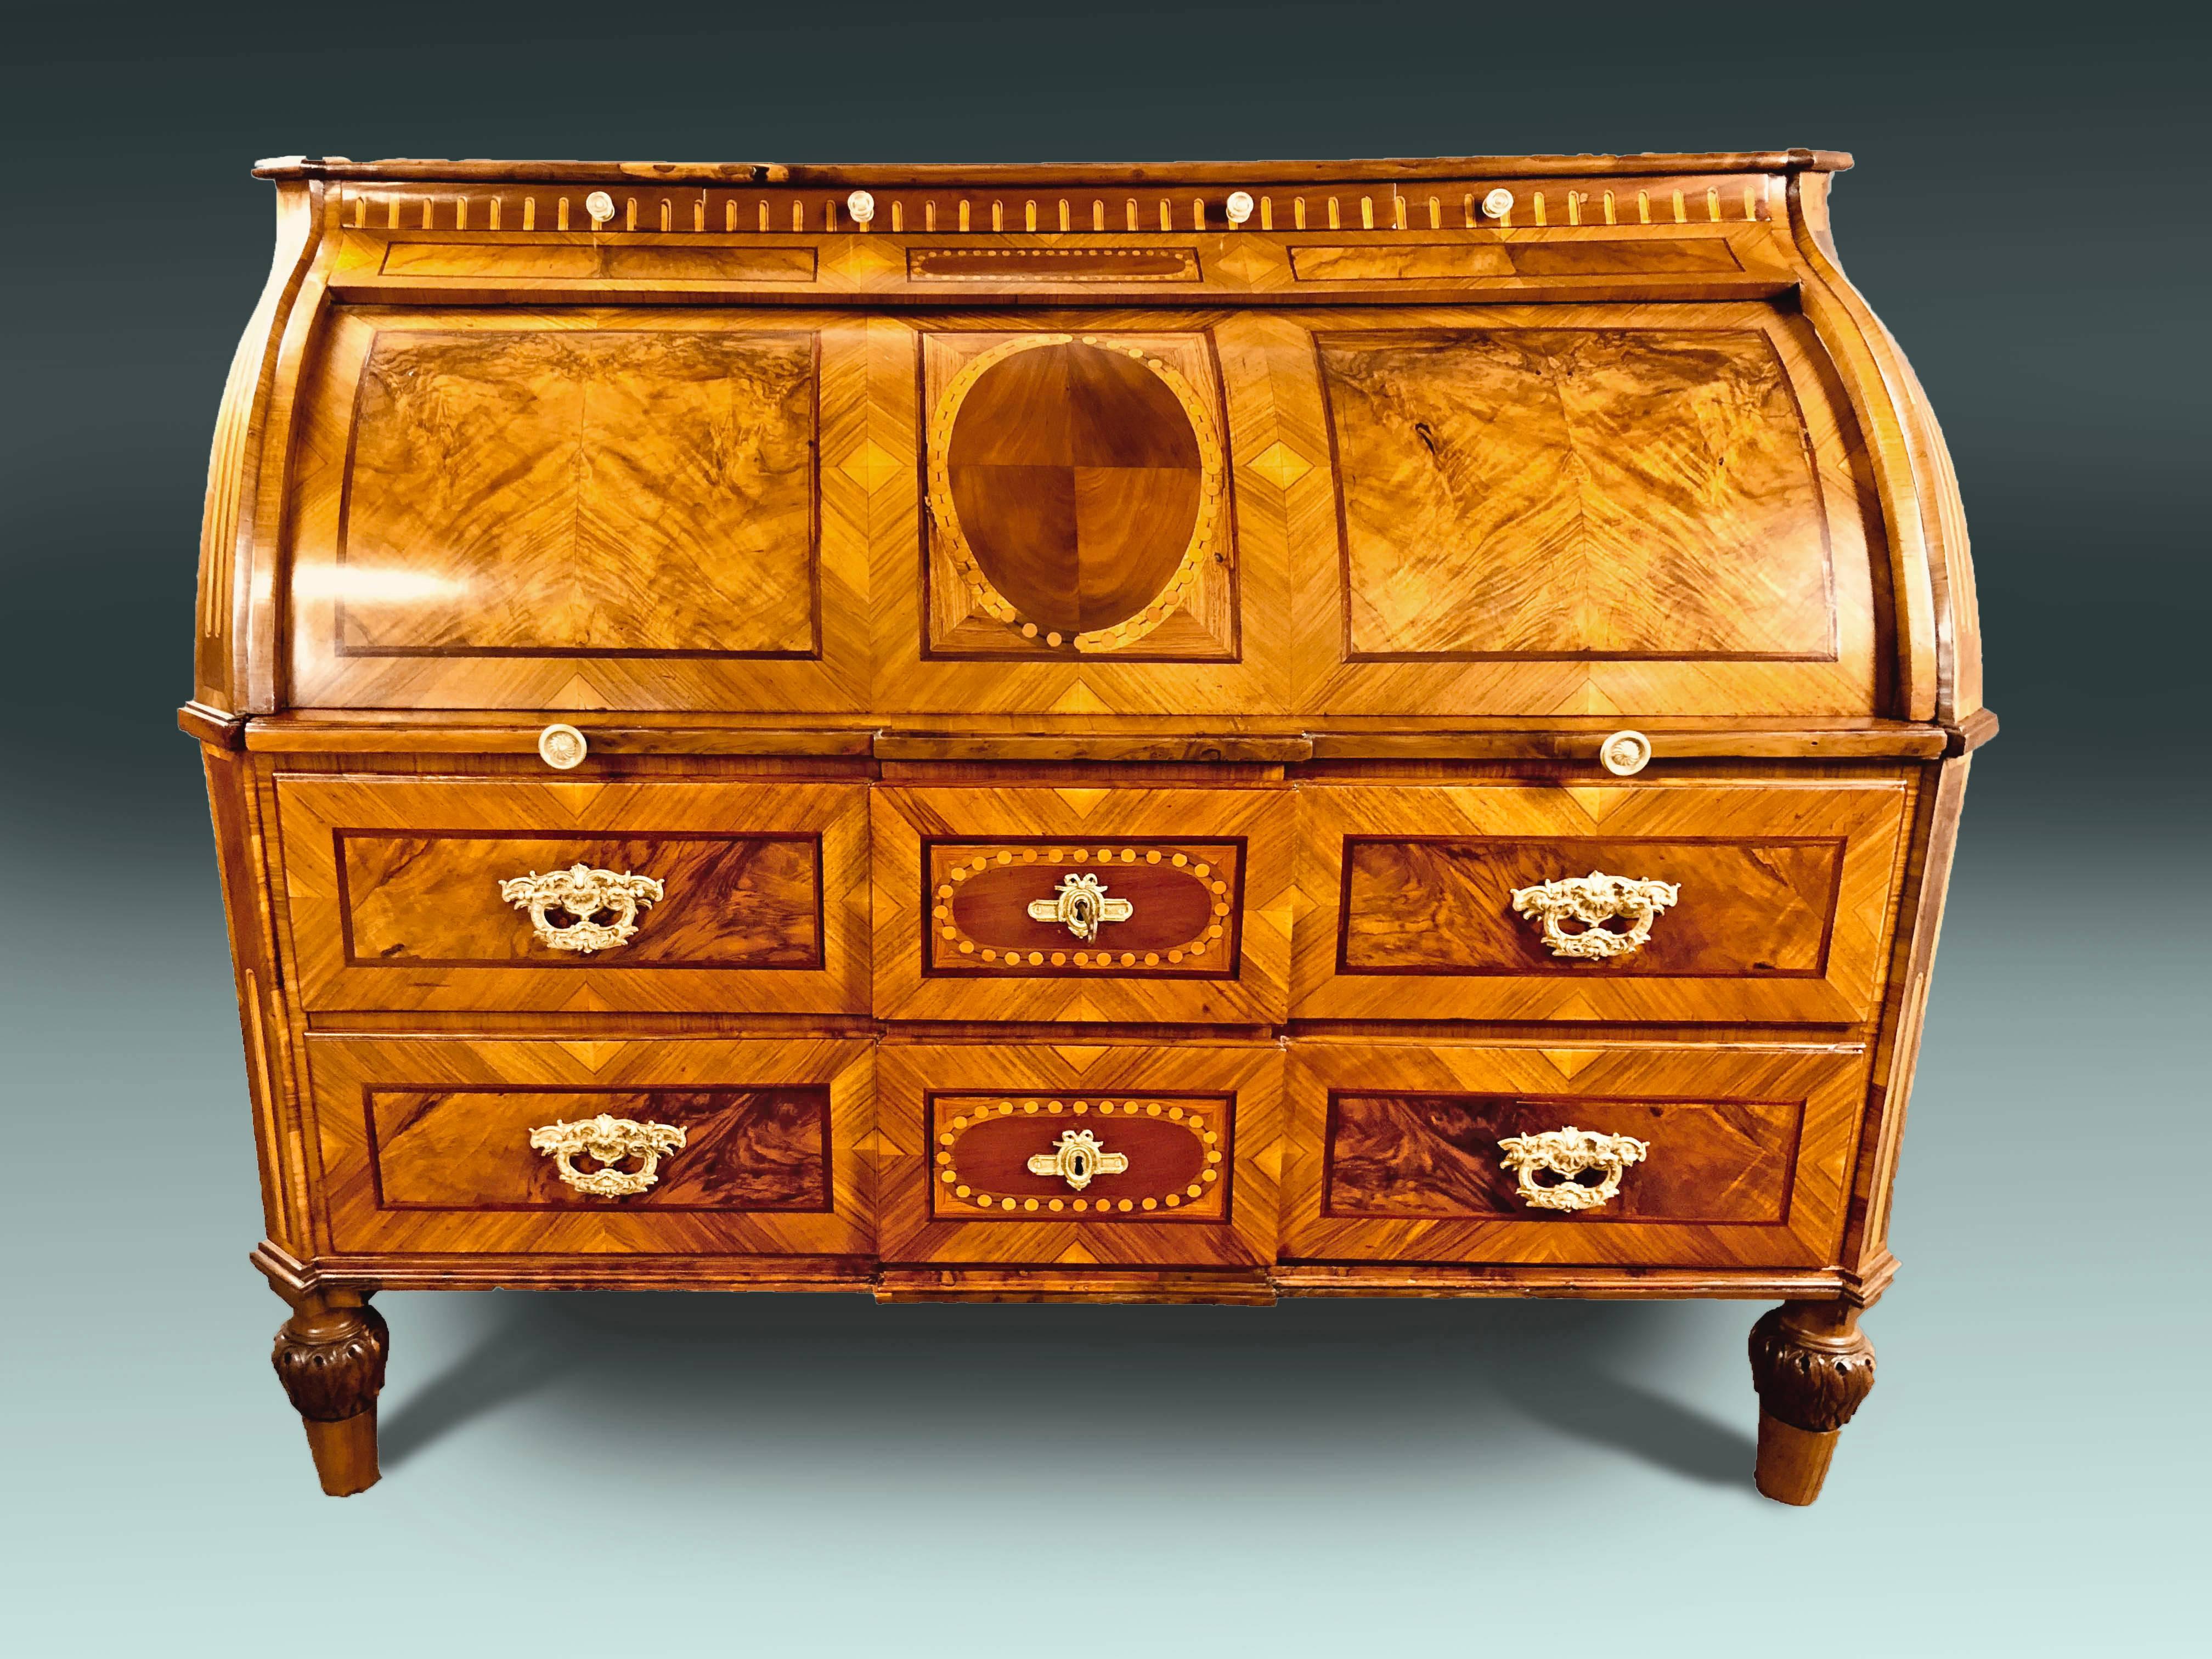 Outstanding 18th century Bureau Secretaire of German origin with cylinder top that rolls open automatically once the sliding writing surface is pulled open. The entire bureau with outstanding contrasting light and dark walnut veneers and intricate